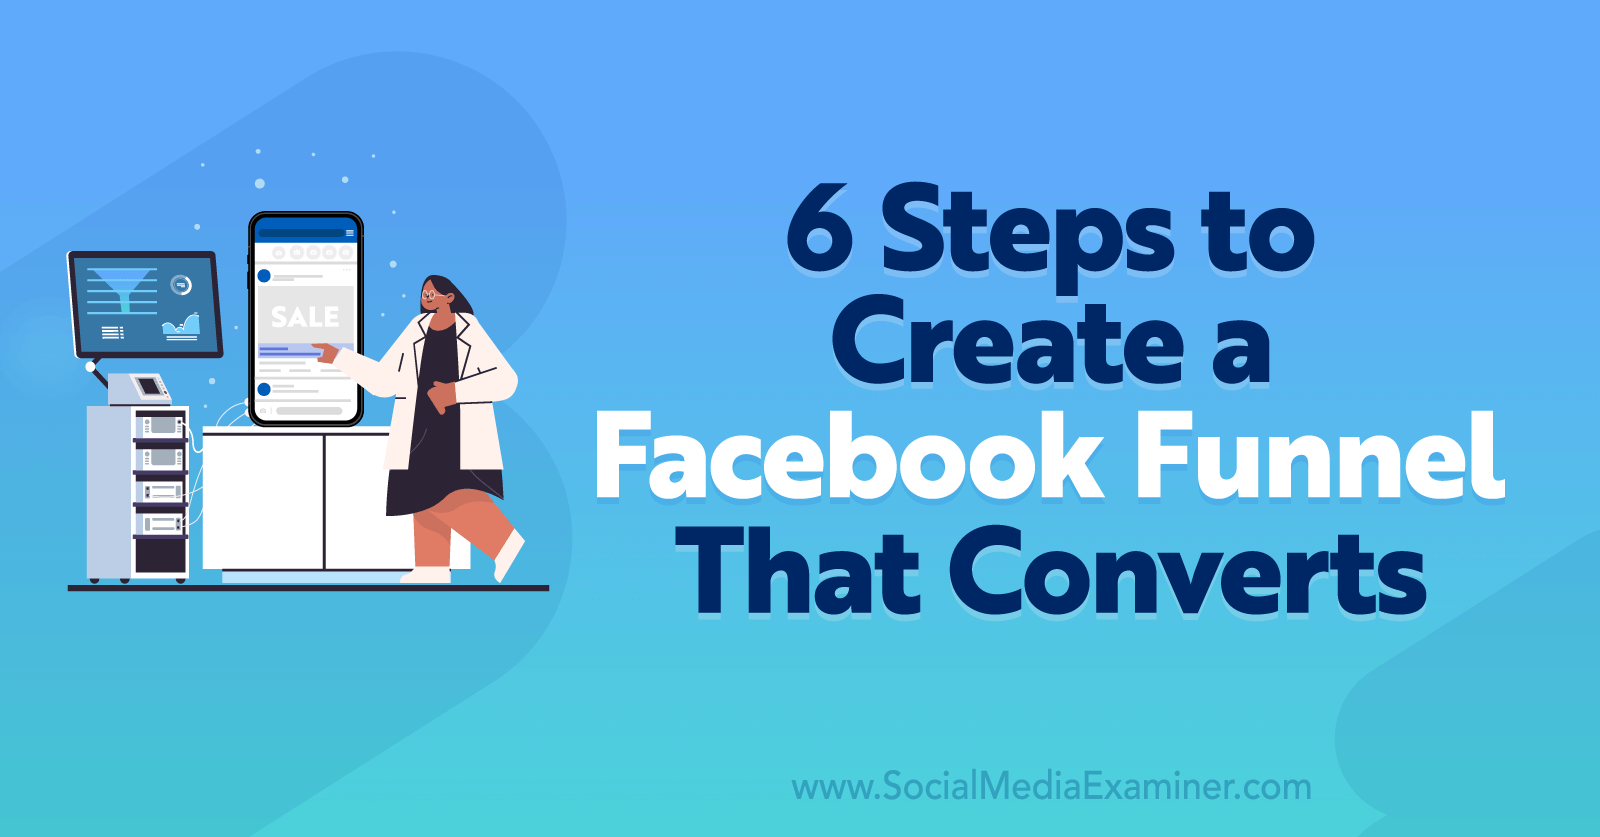 6 Steps to Create a Facebook Funnel That Converts-Social Media Examiner